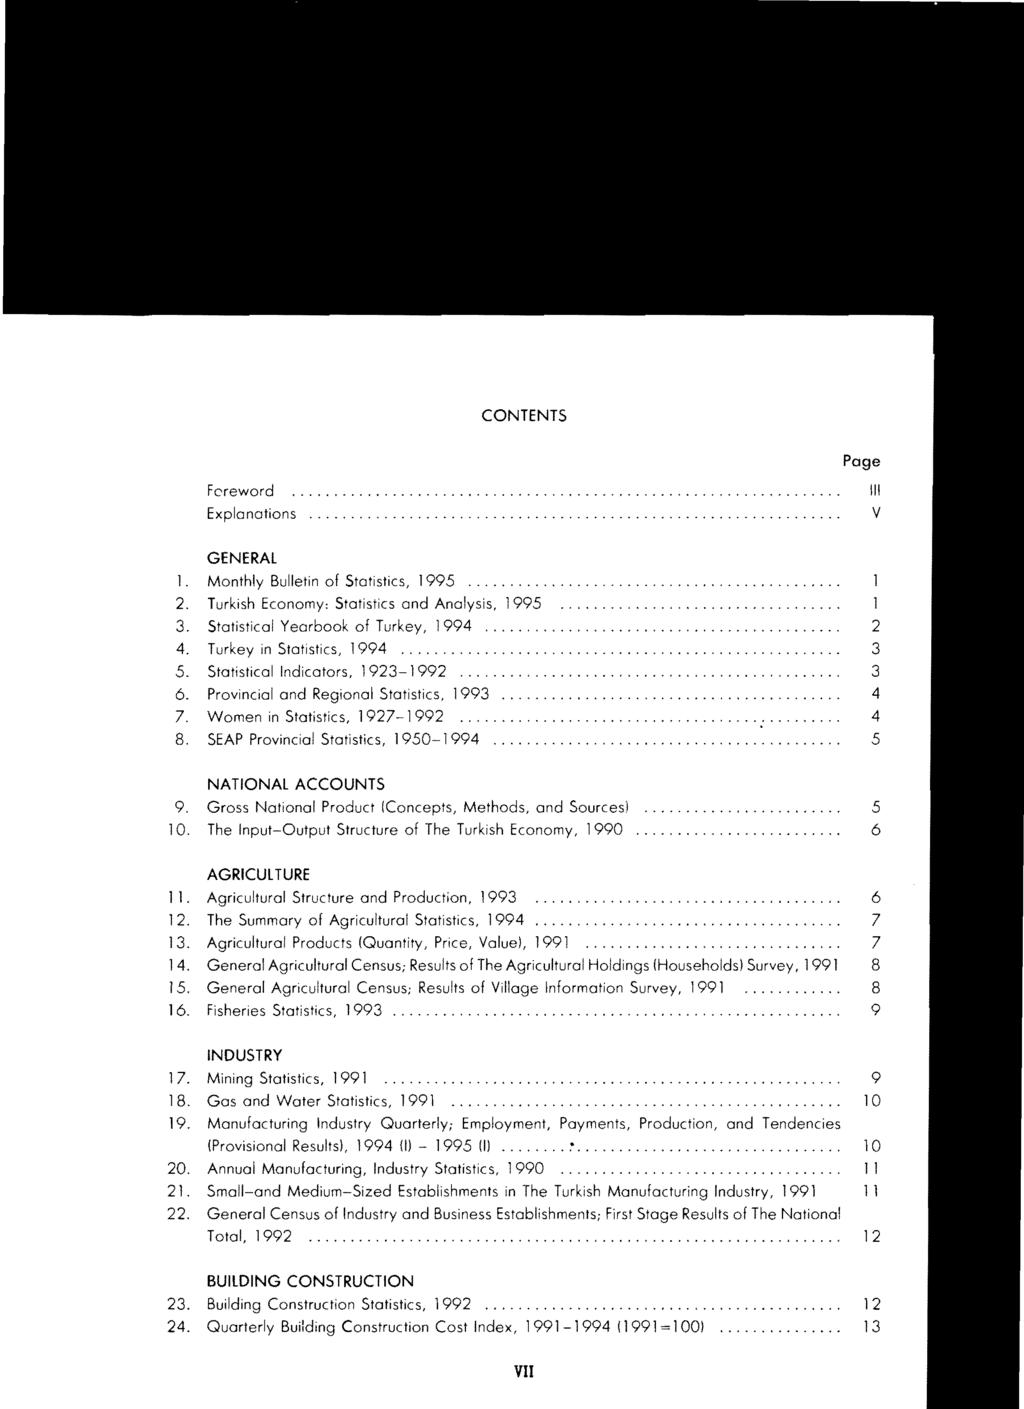 CONTENTS Page Fcreword Explanations III V GENERAL 1. Monthly Bulletin of Statistics, 1995.... 2. Turkish Economy: Statistics and Analysis, 1995.... 3. Statistical Yearbook of Turkey, 1994... 2 4.